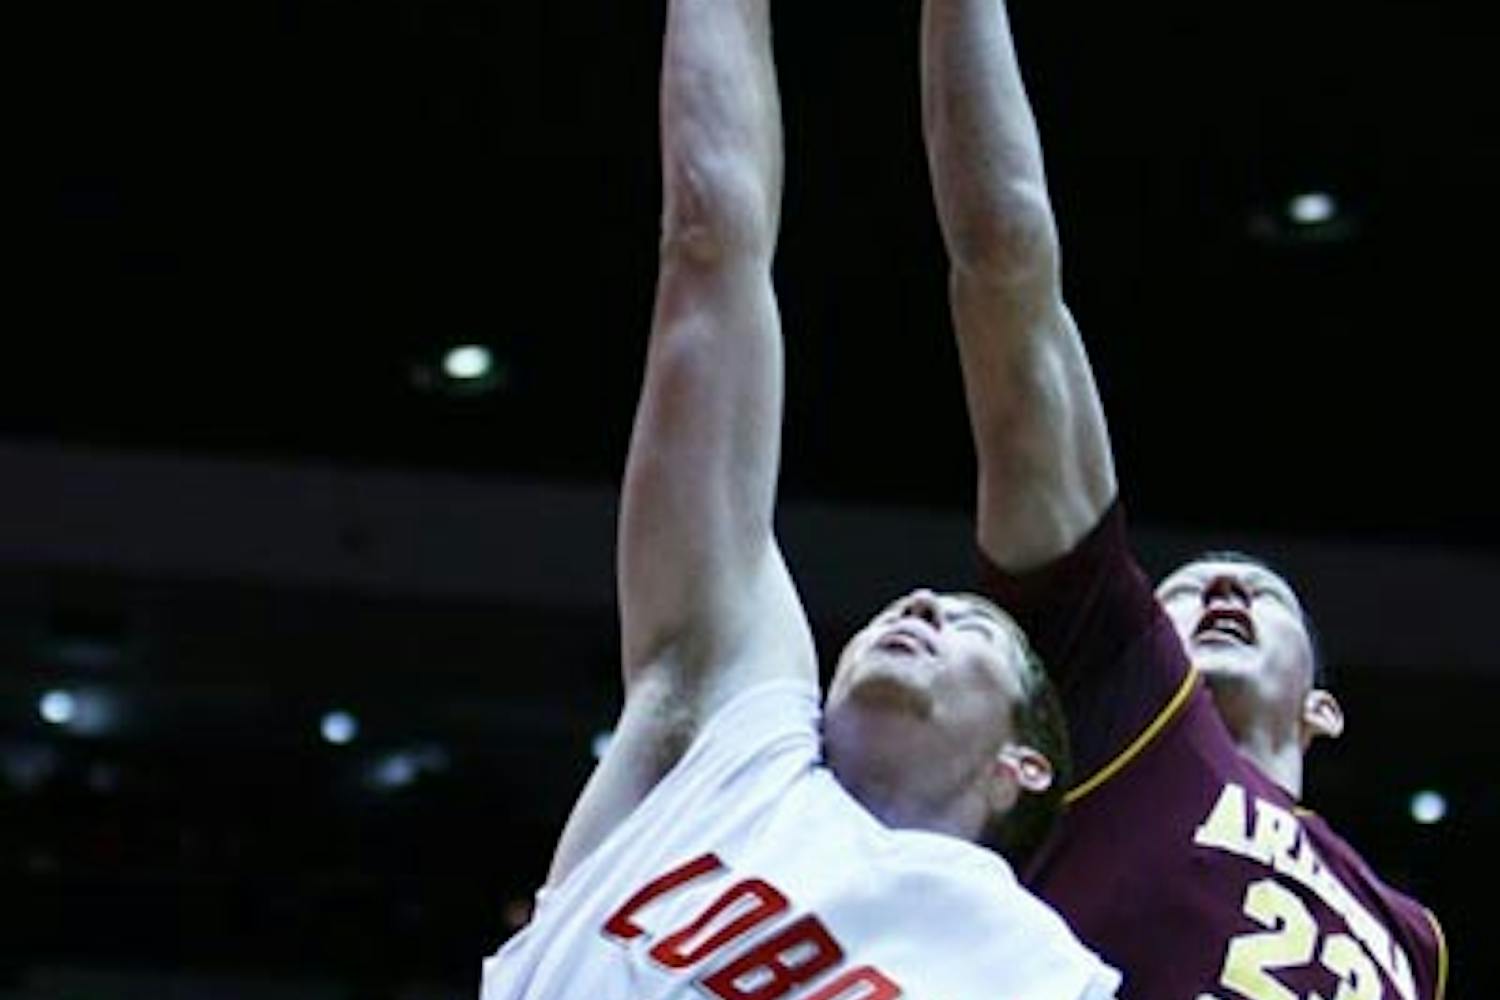 FALLING SHORT: ASU sophomore center Ruslan Pateev and New Mexico freshman center Alex Kirk battle for a rebound during Tuesday night's game in Albuquerque. The Lobos topped the Sun Devils 76-62 behind a crucial 20-0 run in the first half. (Photo Courtesy of Vanessa Sanchez)